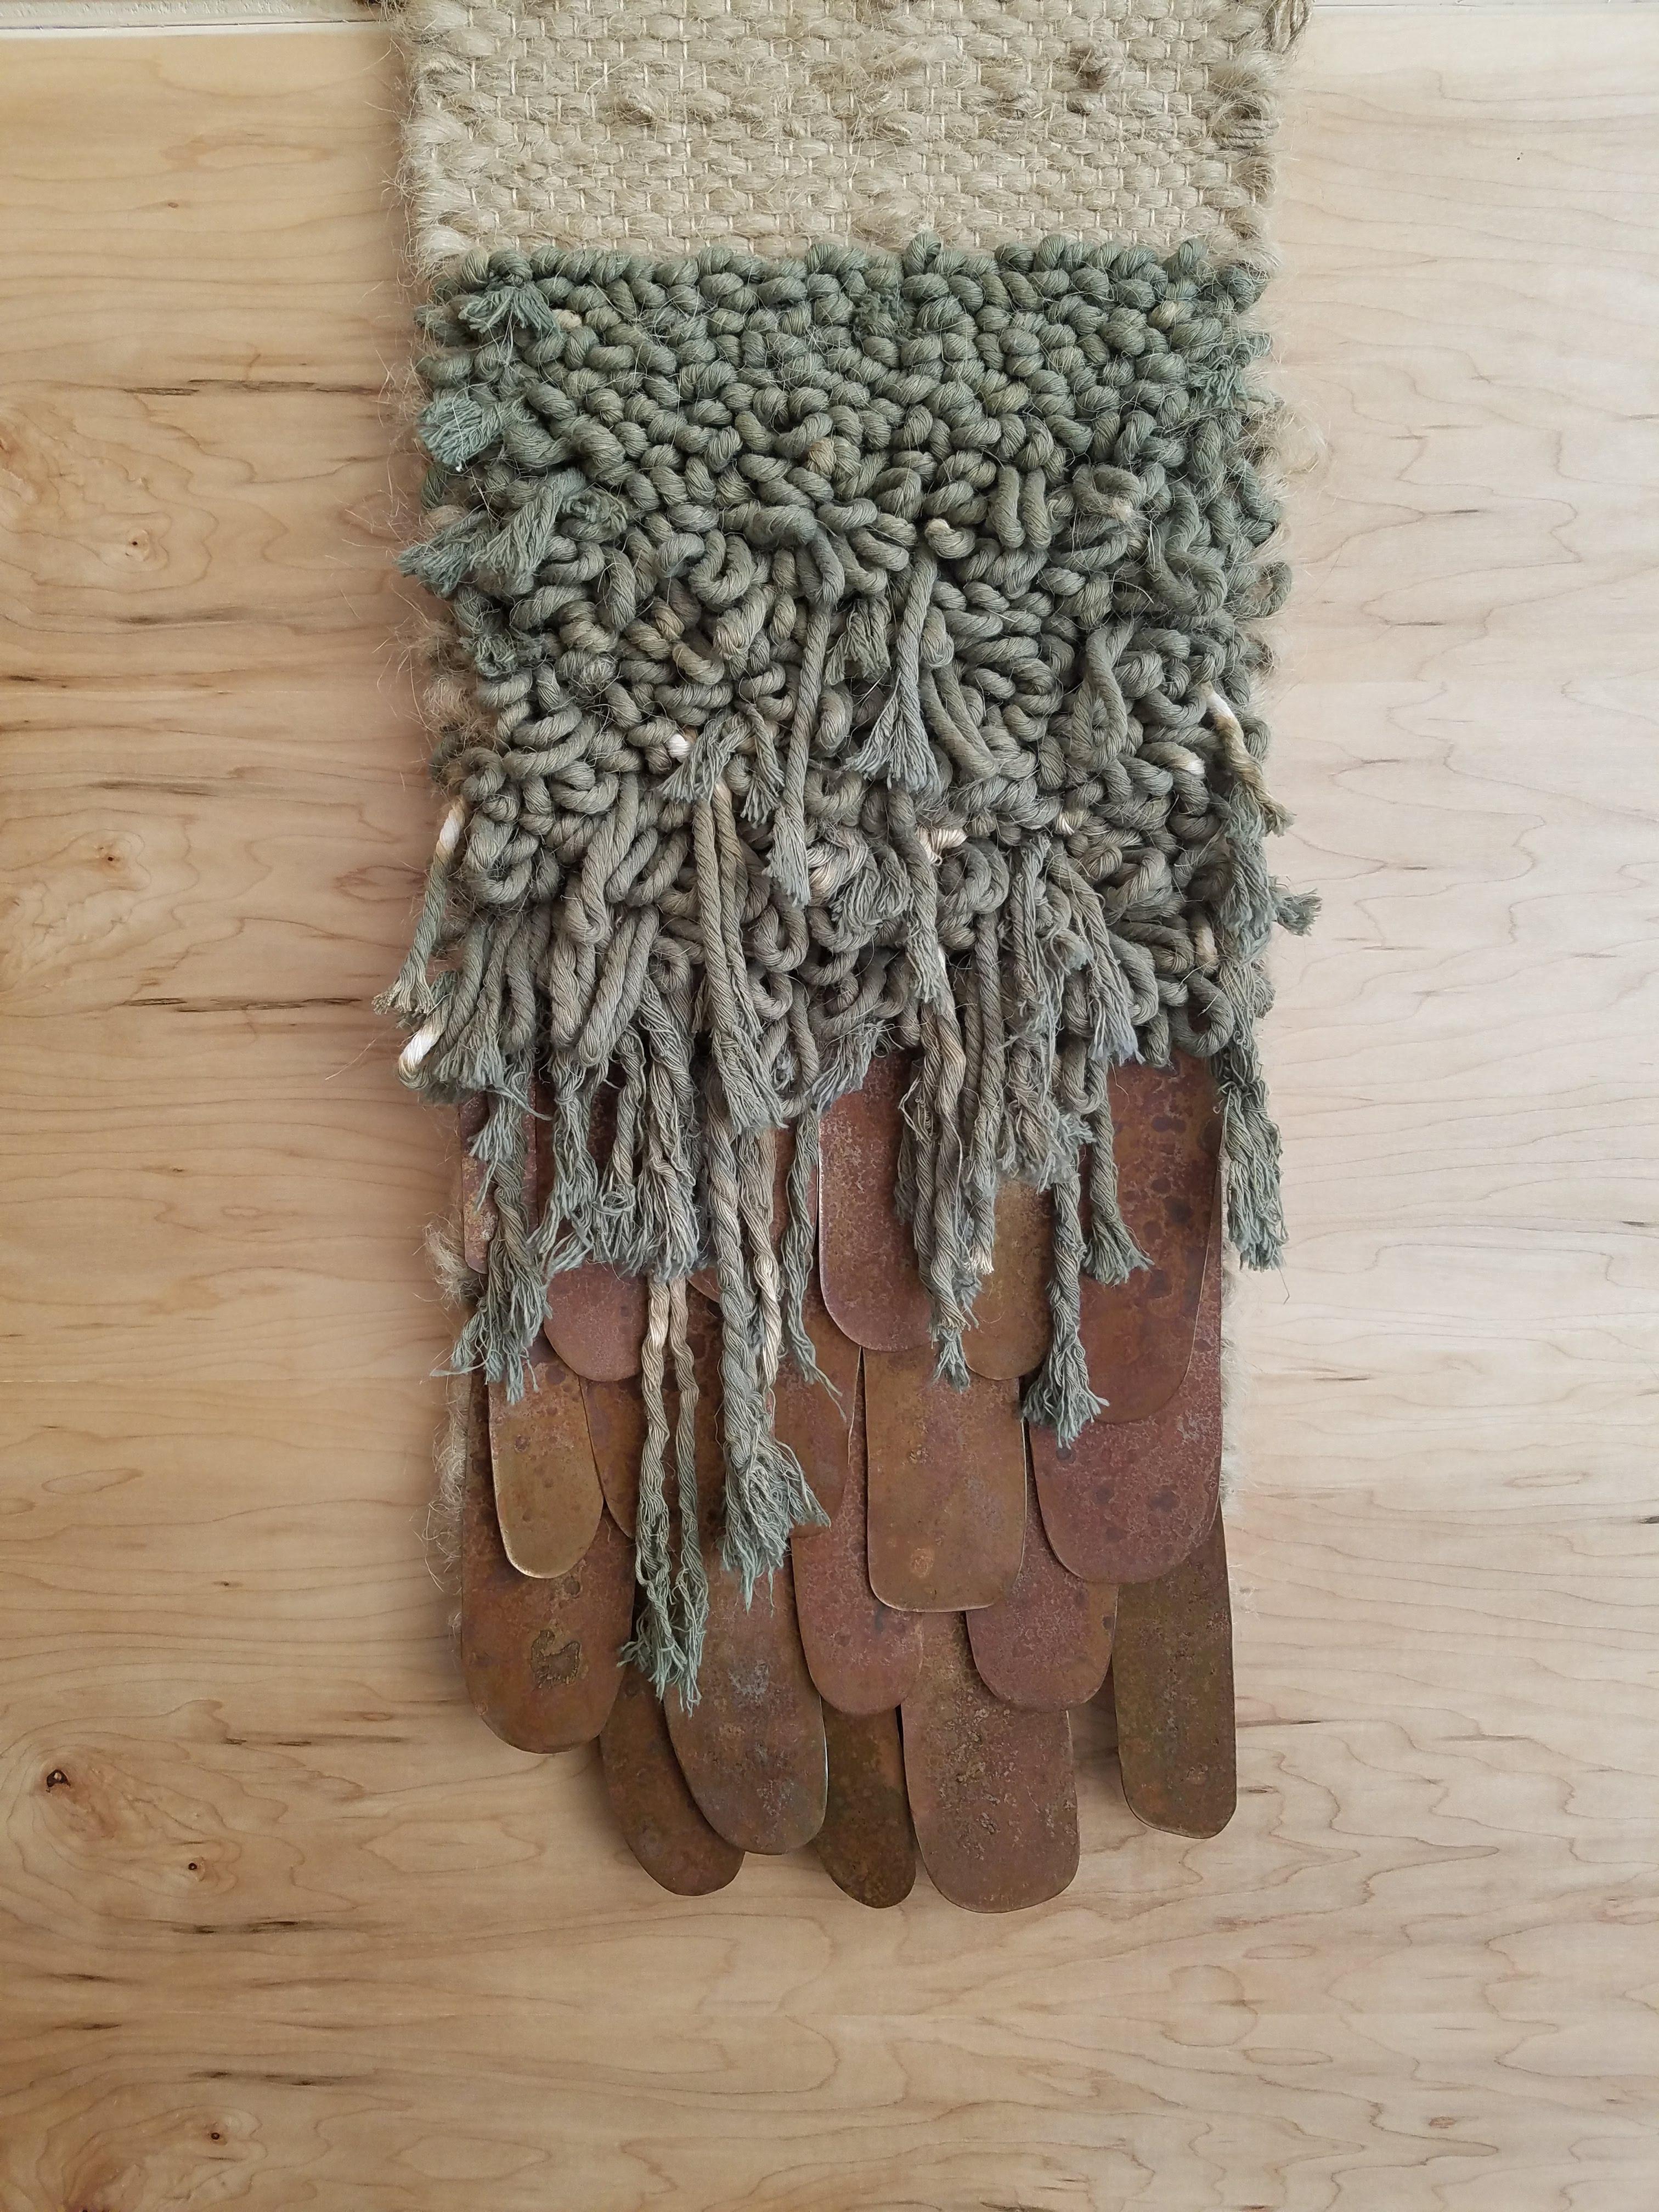 Handwoven, tapestry style, wall hanging by Janelle Pietrzak of All Roads. Rustic hemp fiber is paired with hand dyed army green cotton yarn. Hand cut steel shapes are treated with a special patina for a rusty finish and hand waxed. Weaving hangs